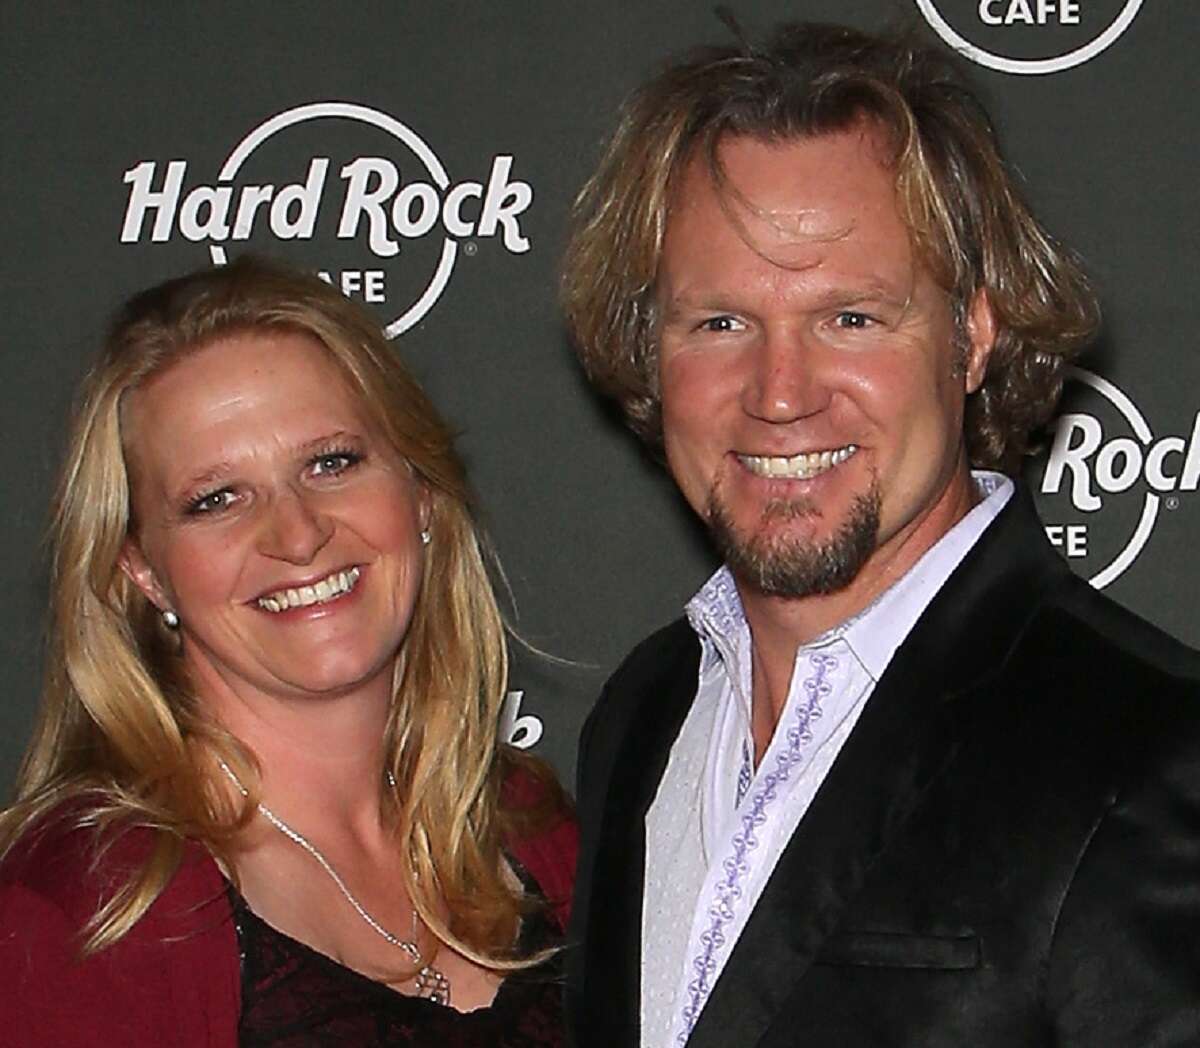 Christine and Kody Brown pose together at the Hard Rock Cafe Las Vegas in 2015